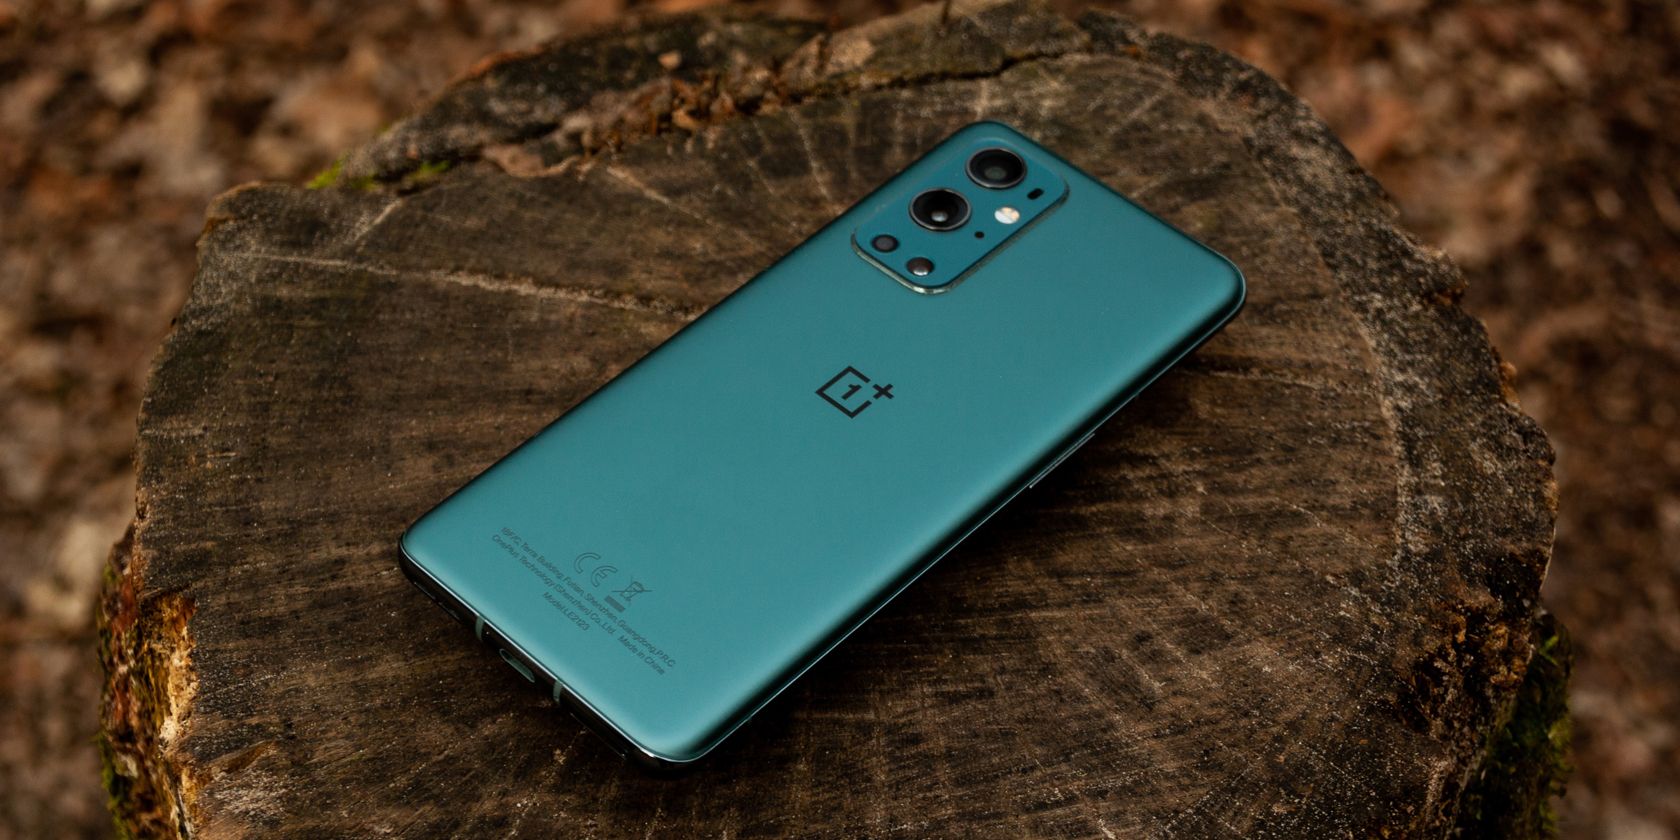 A green OnePlus phone on a timber log